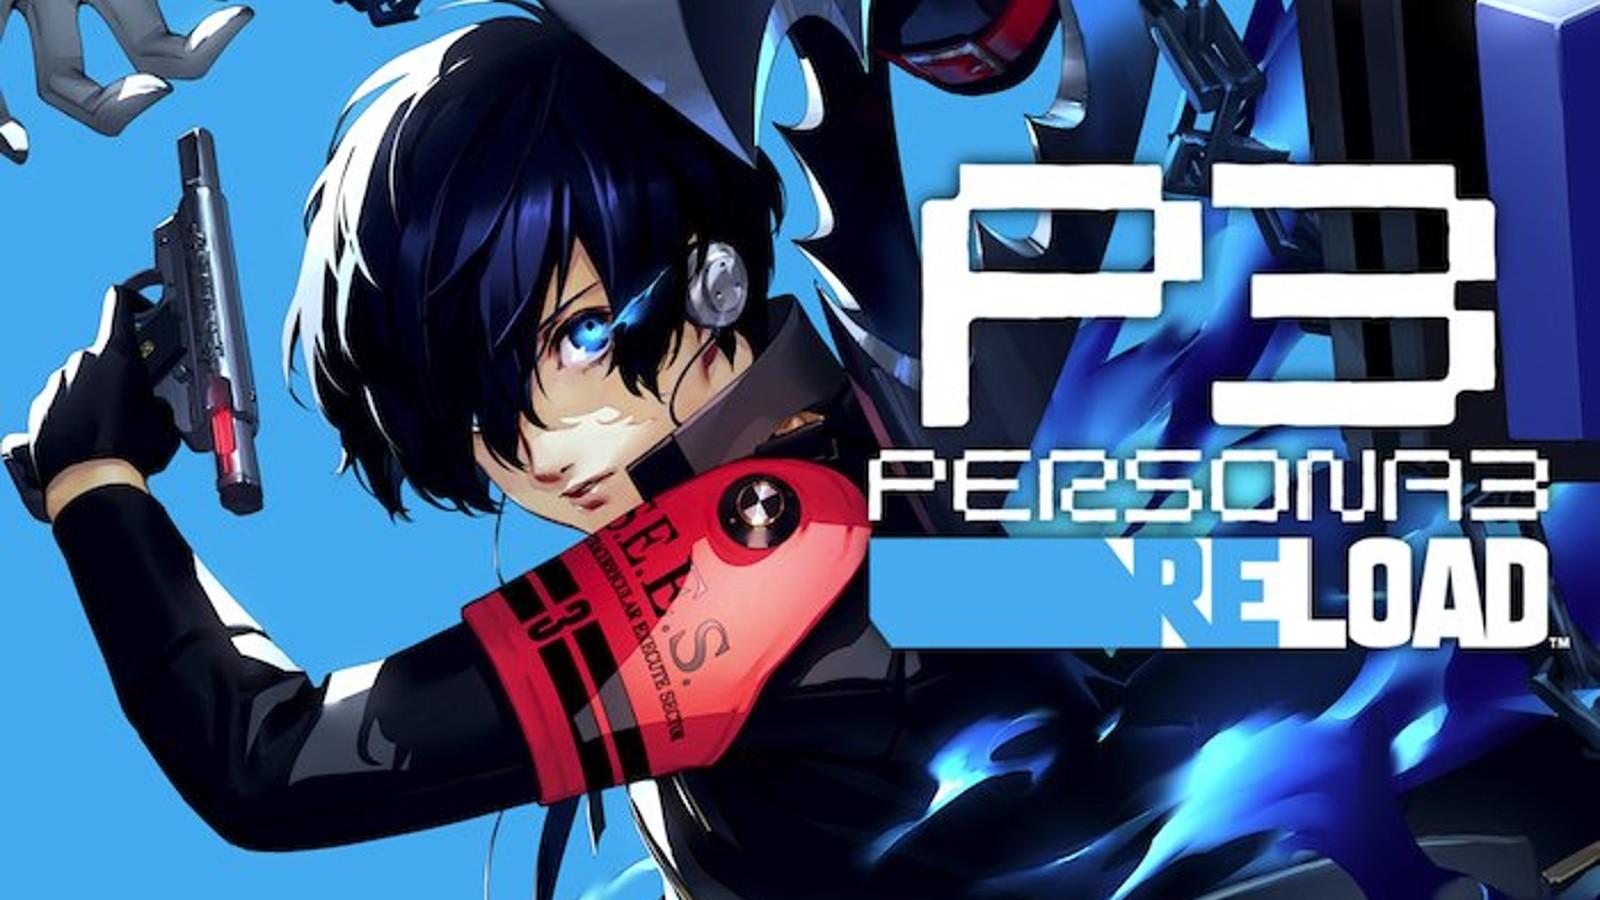 An image of the official Persona 3 Reload cover art.